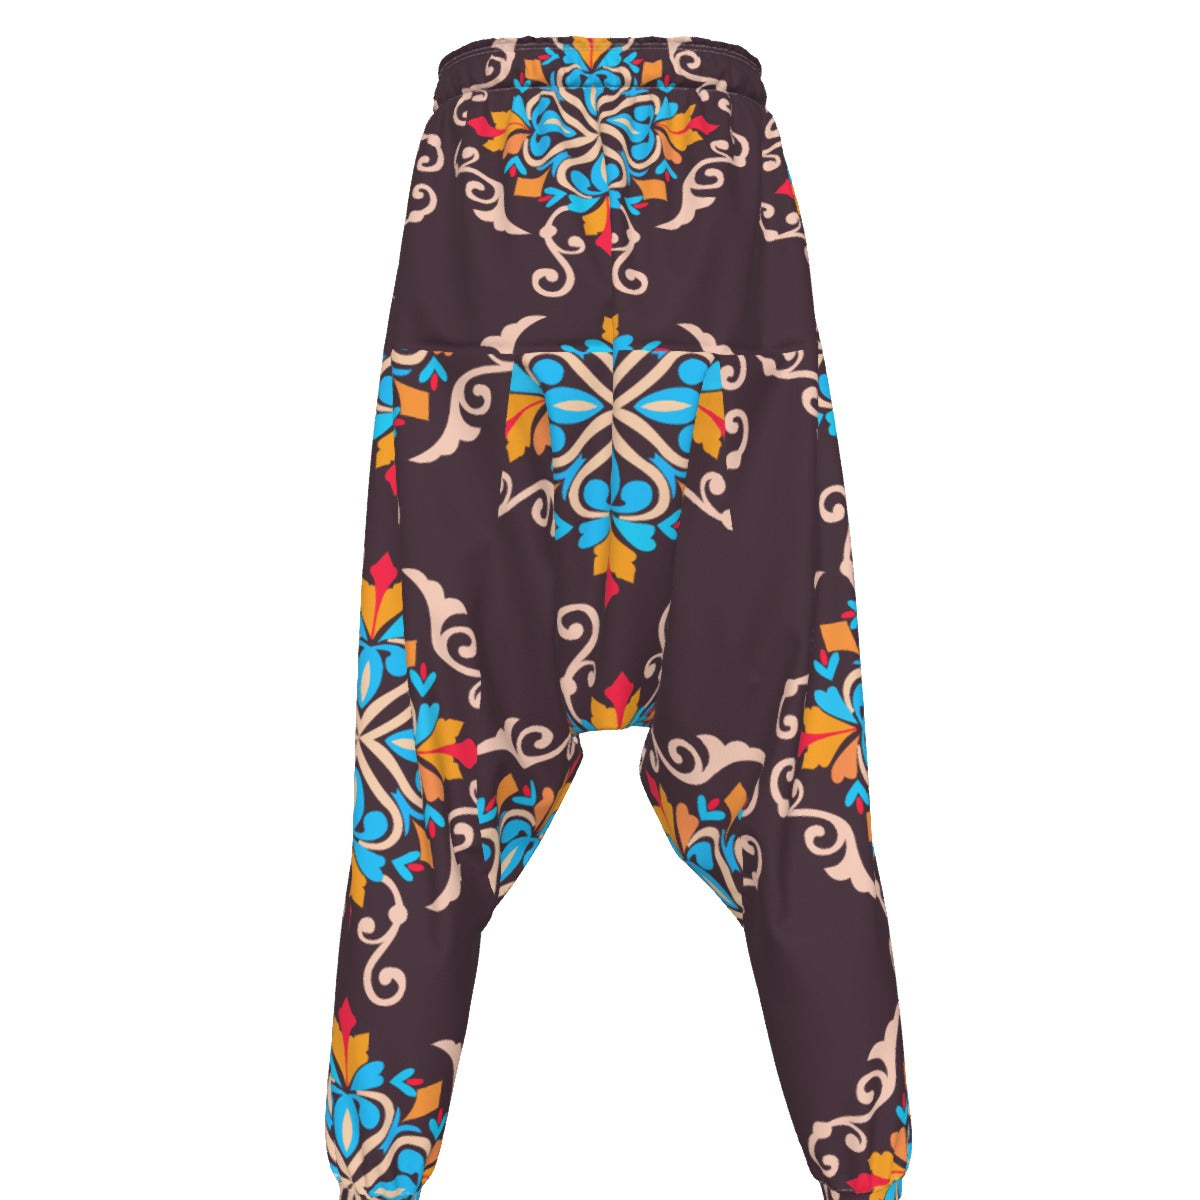 Hippie Pants Meditation and Yoga Trousers - Personal Hour for Yoga and Meditations 